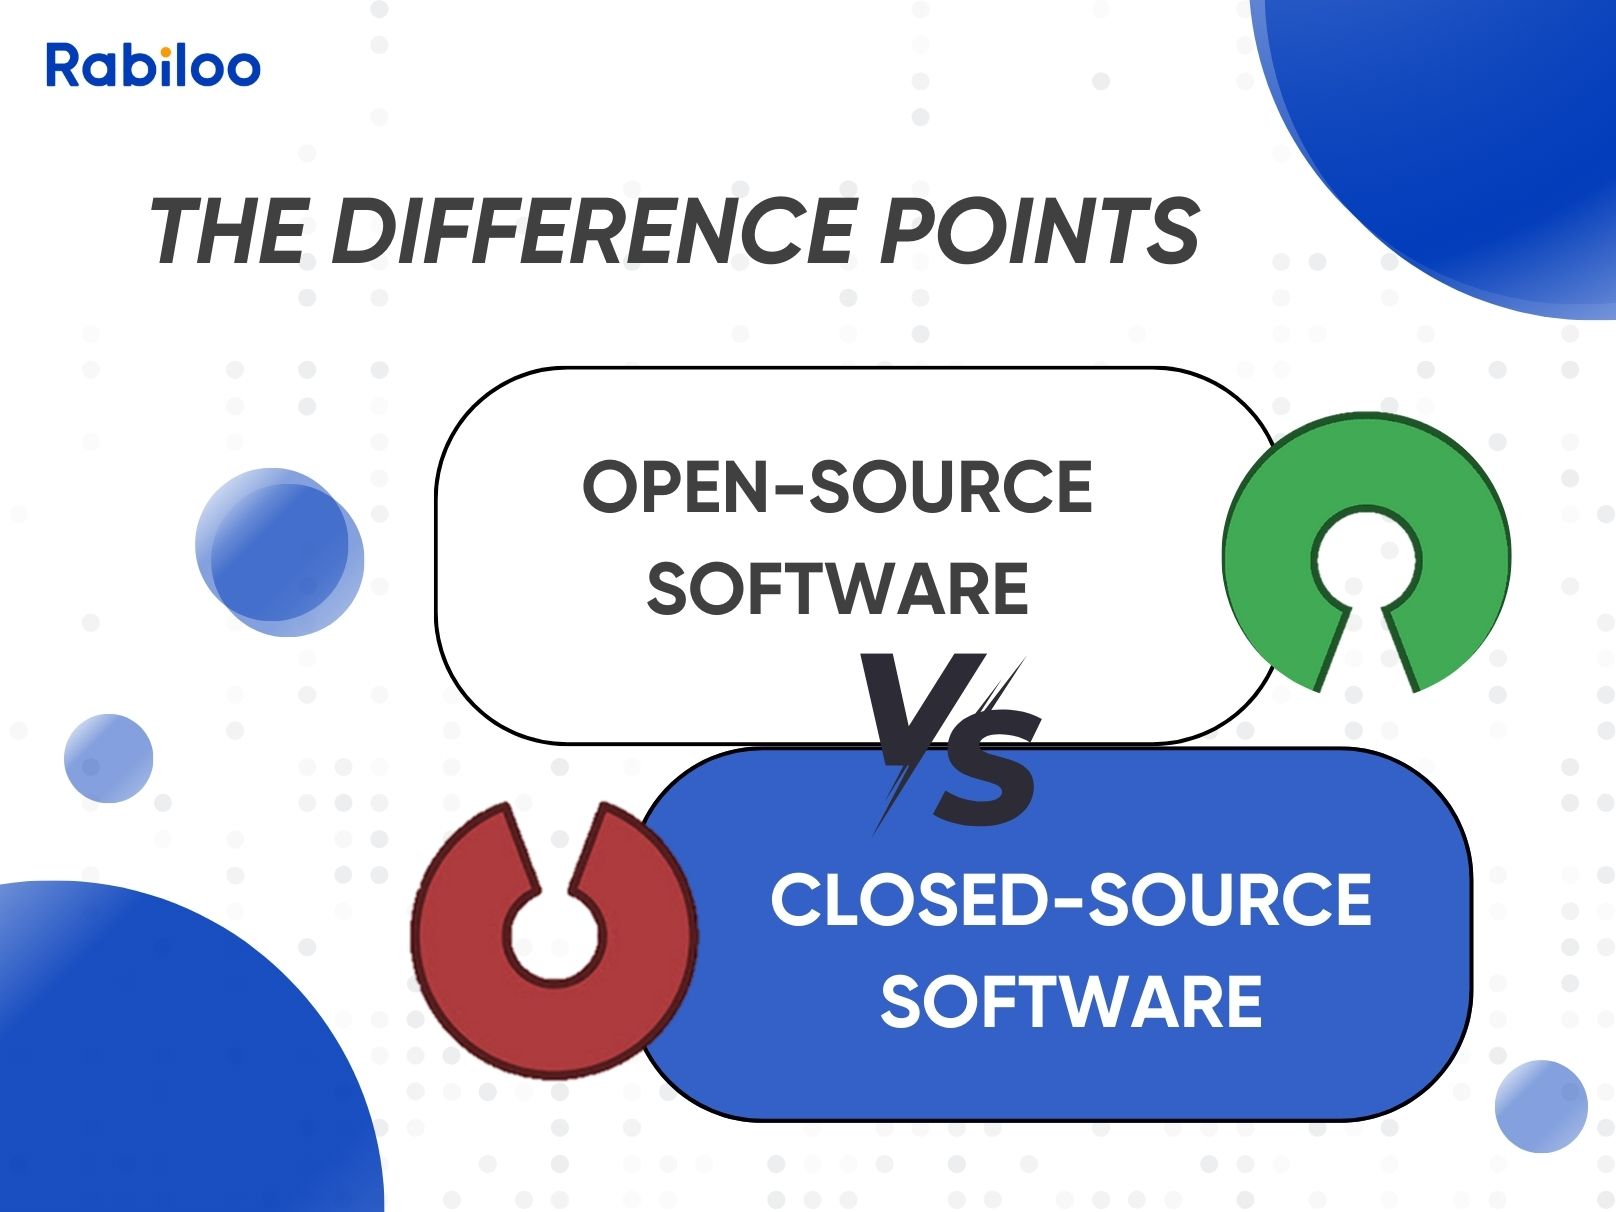 Differentiating the points of divergence between open-source software and closed-source software